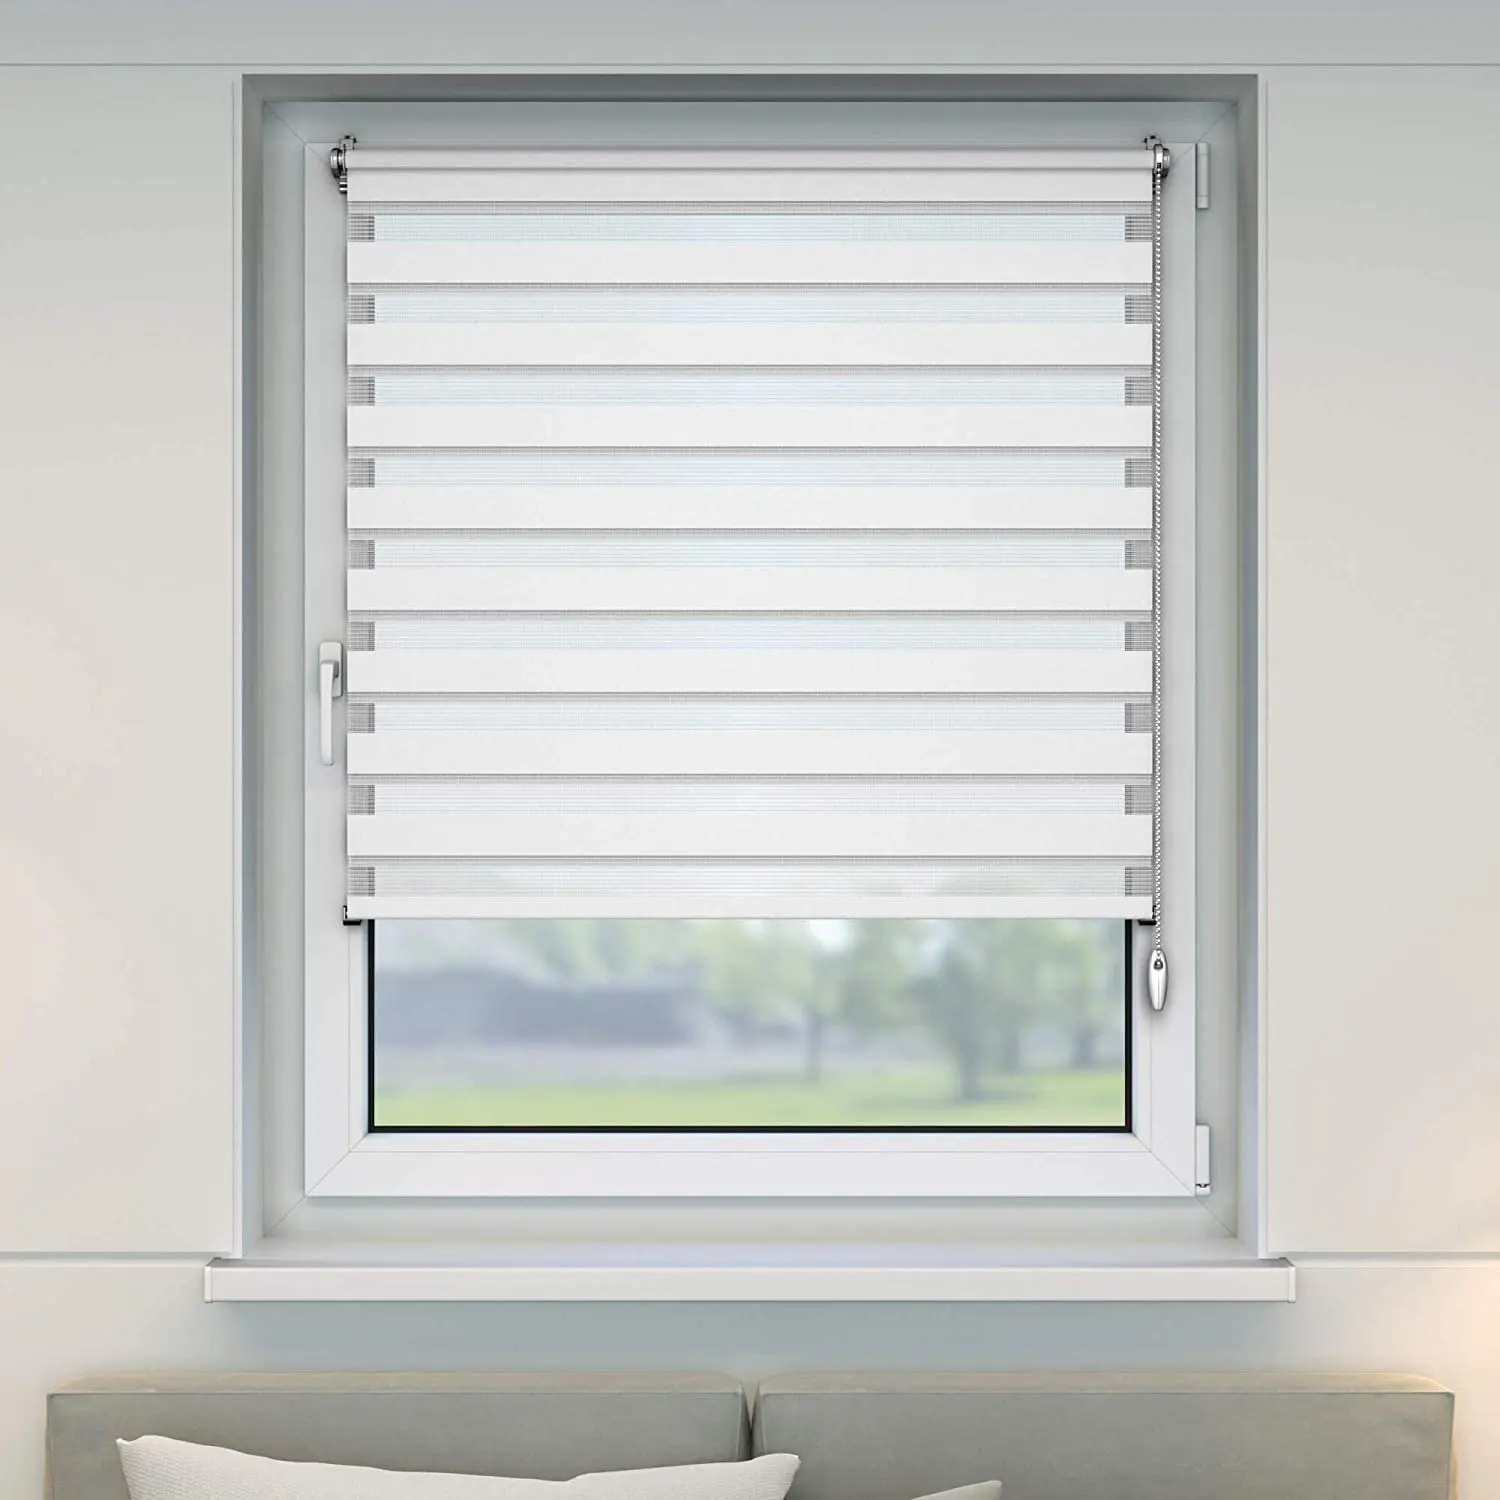 blackout zebra shades for office or home automatic smart control blinds solar semi blackout curtains